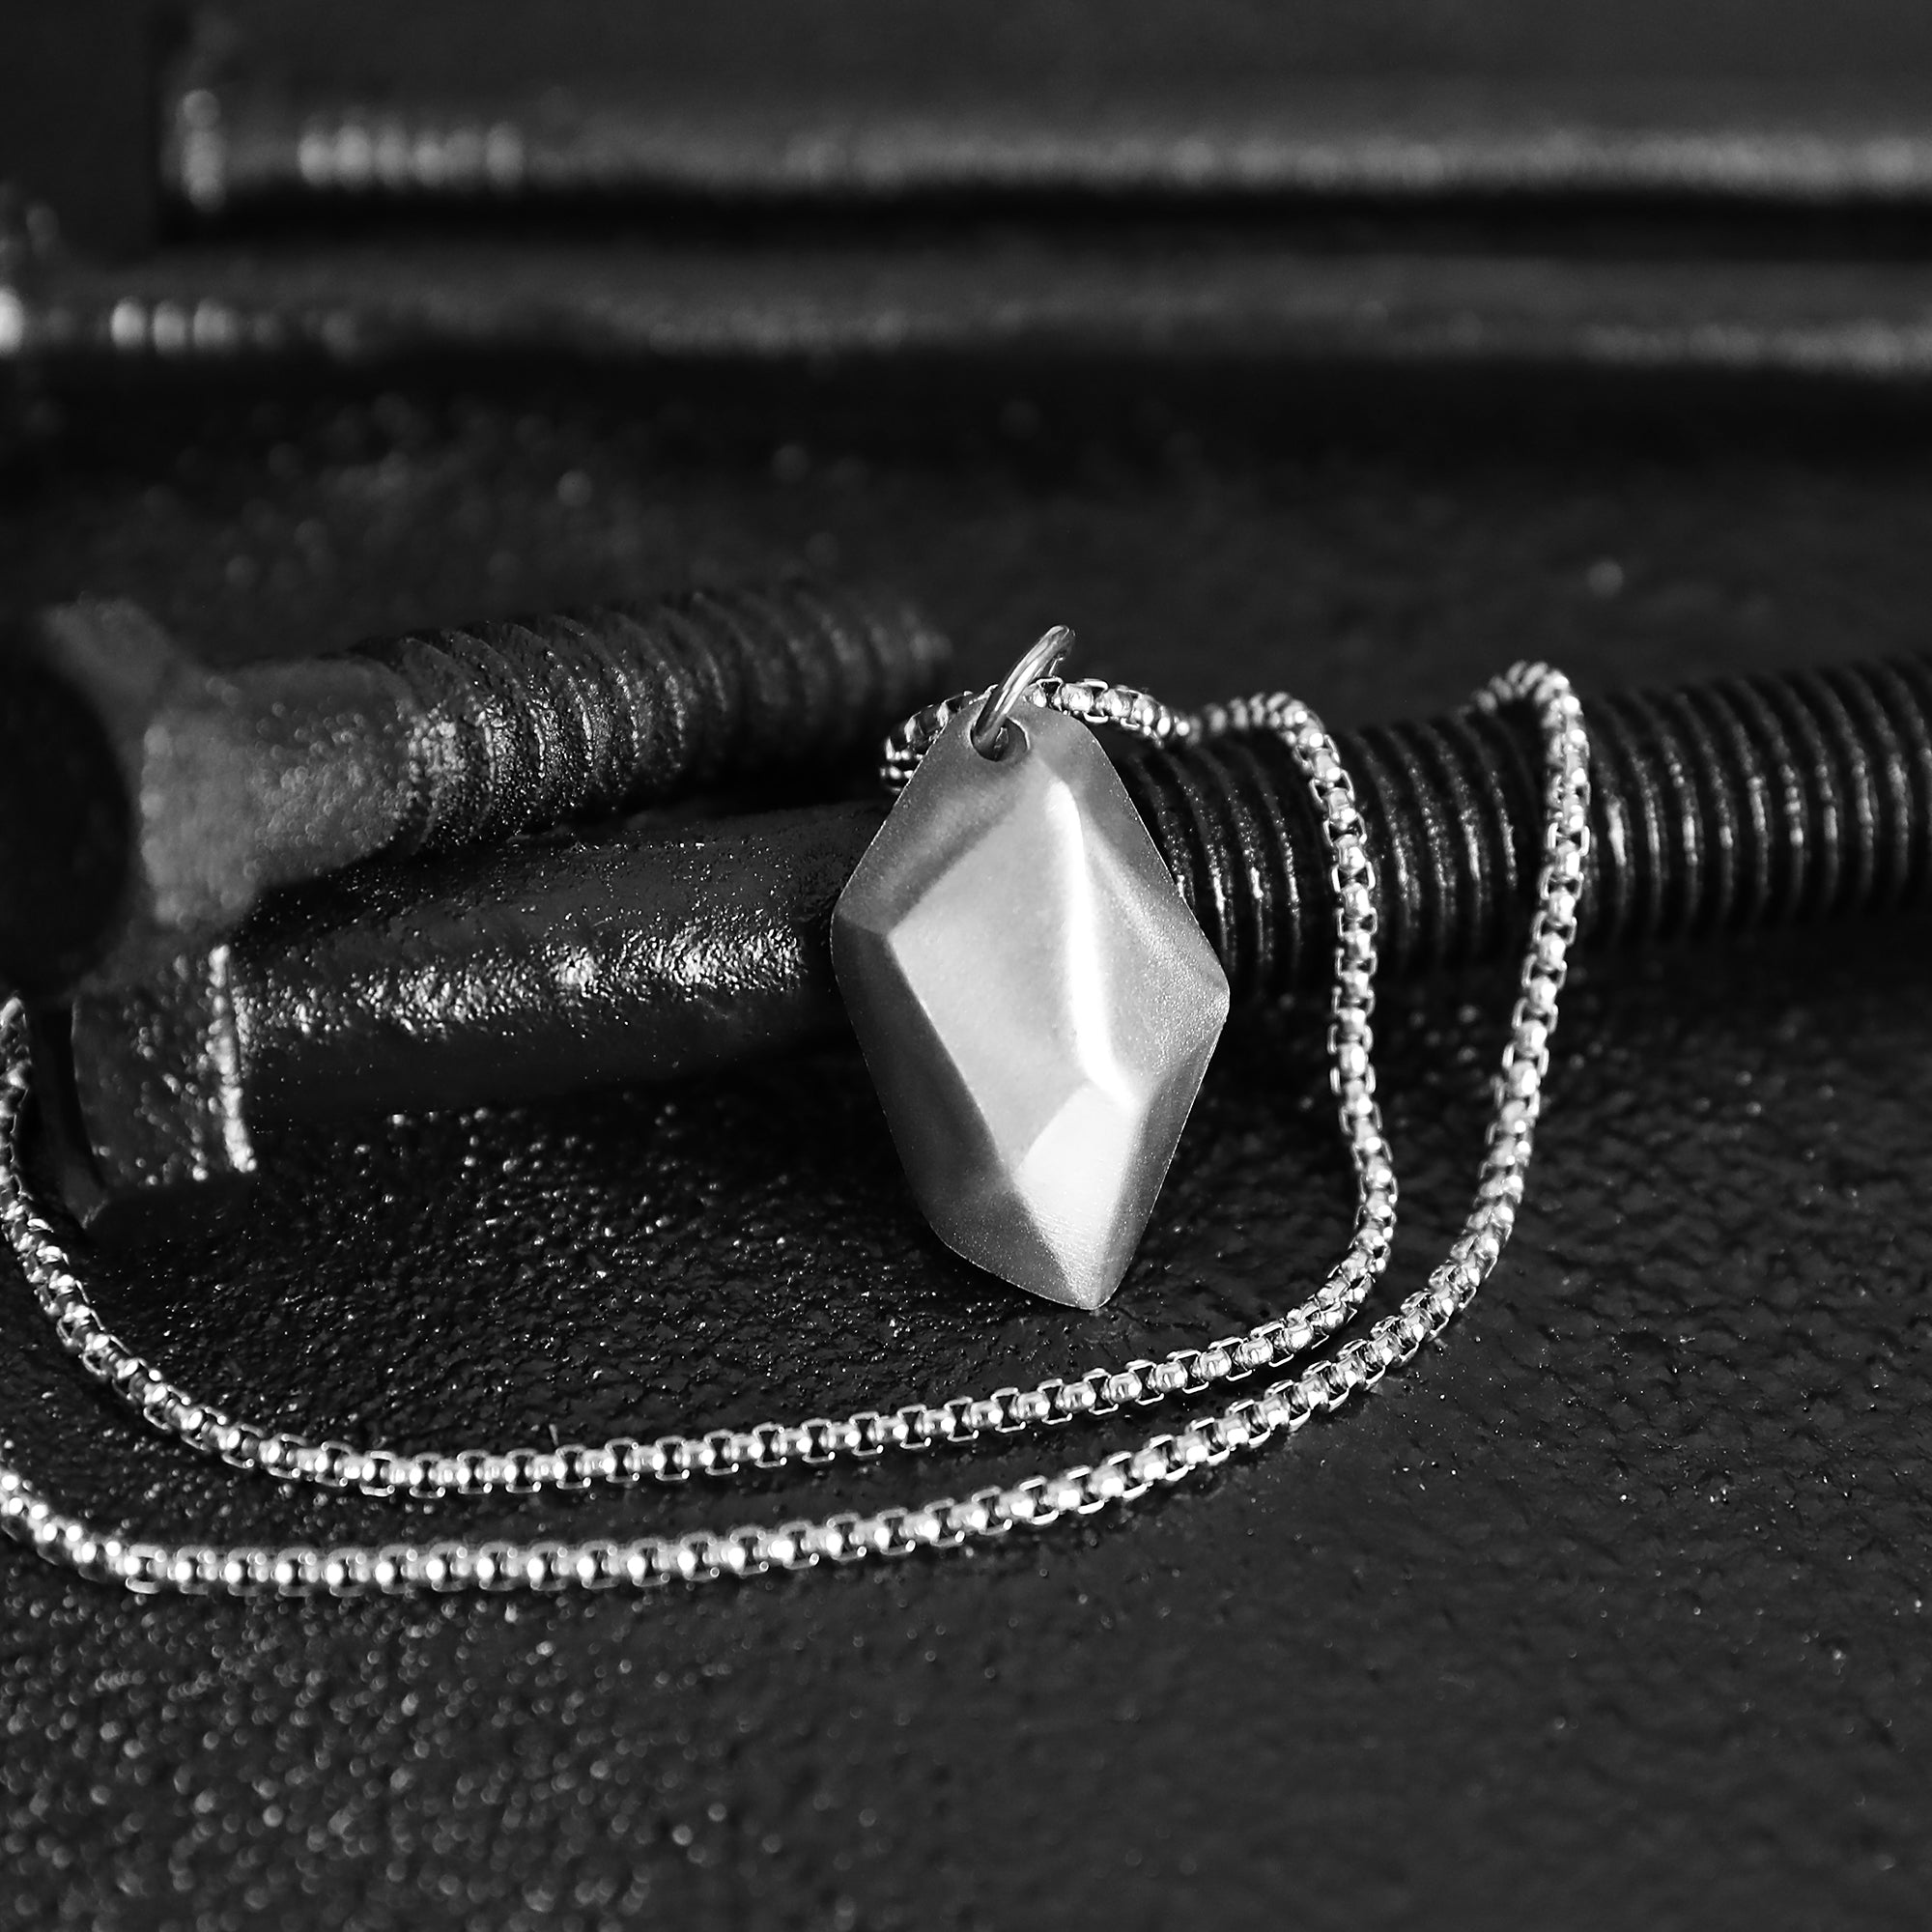 Wishing Stone Necklace - Matte Silver